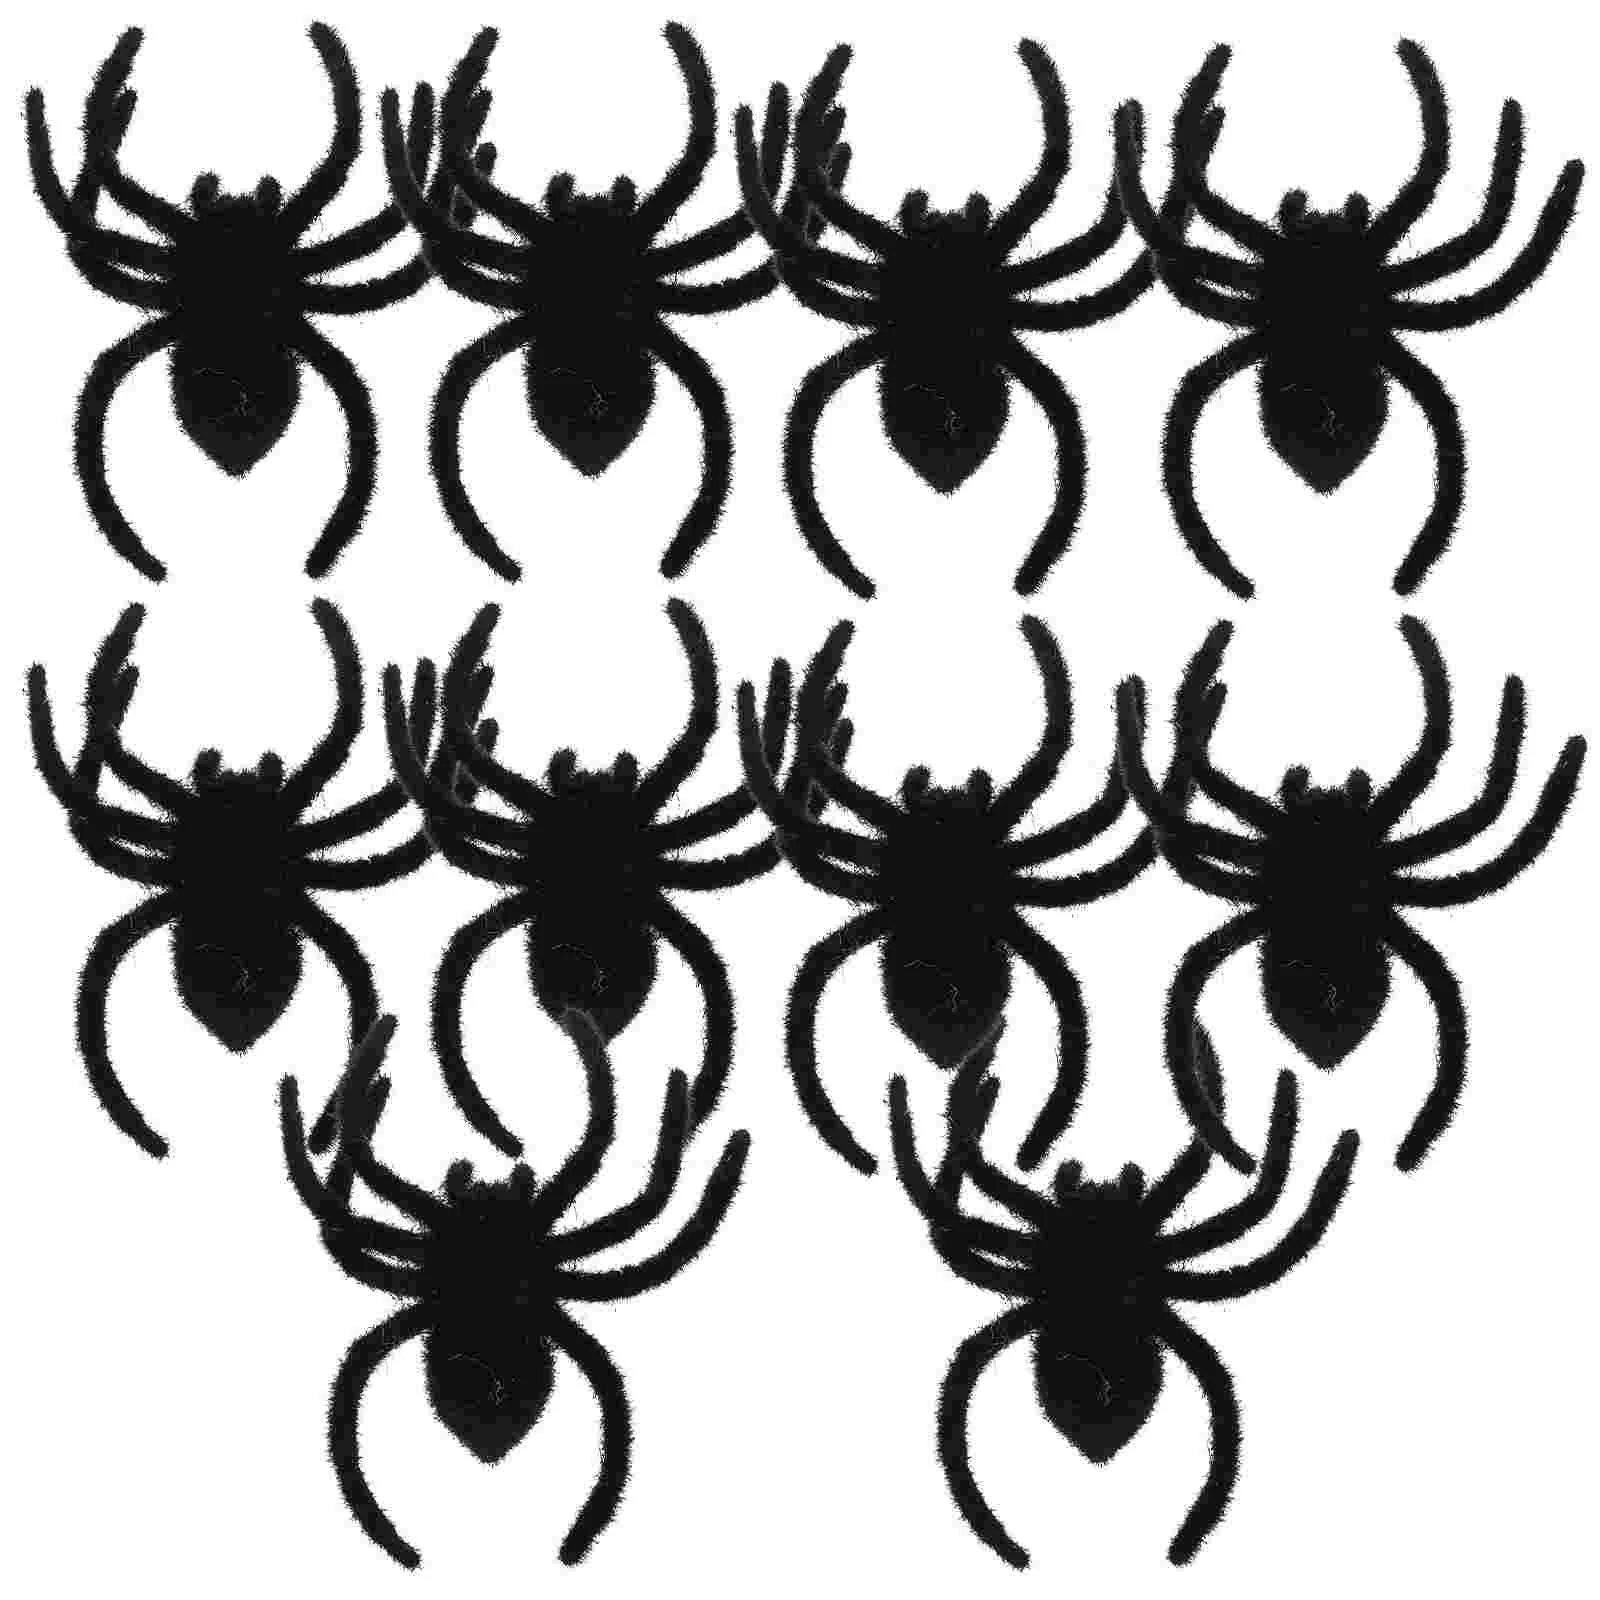 

10 Pcs Big Spider Halloween Prop Festival Prank Toy Decorations Outdoor Party Ornament Flocking Toys